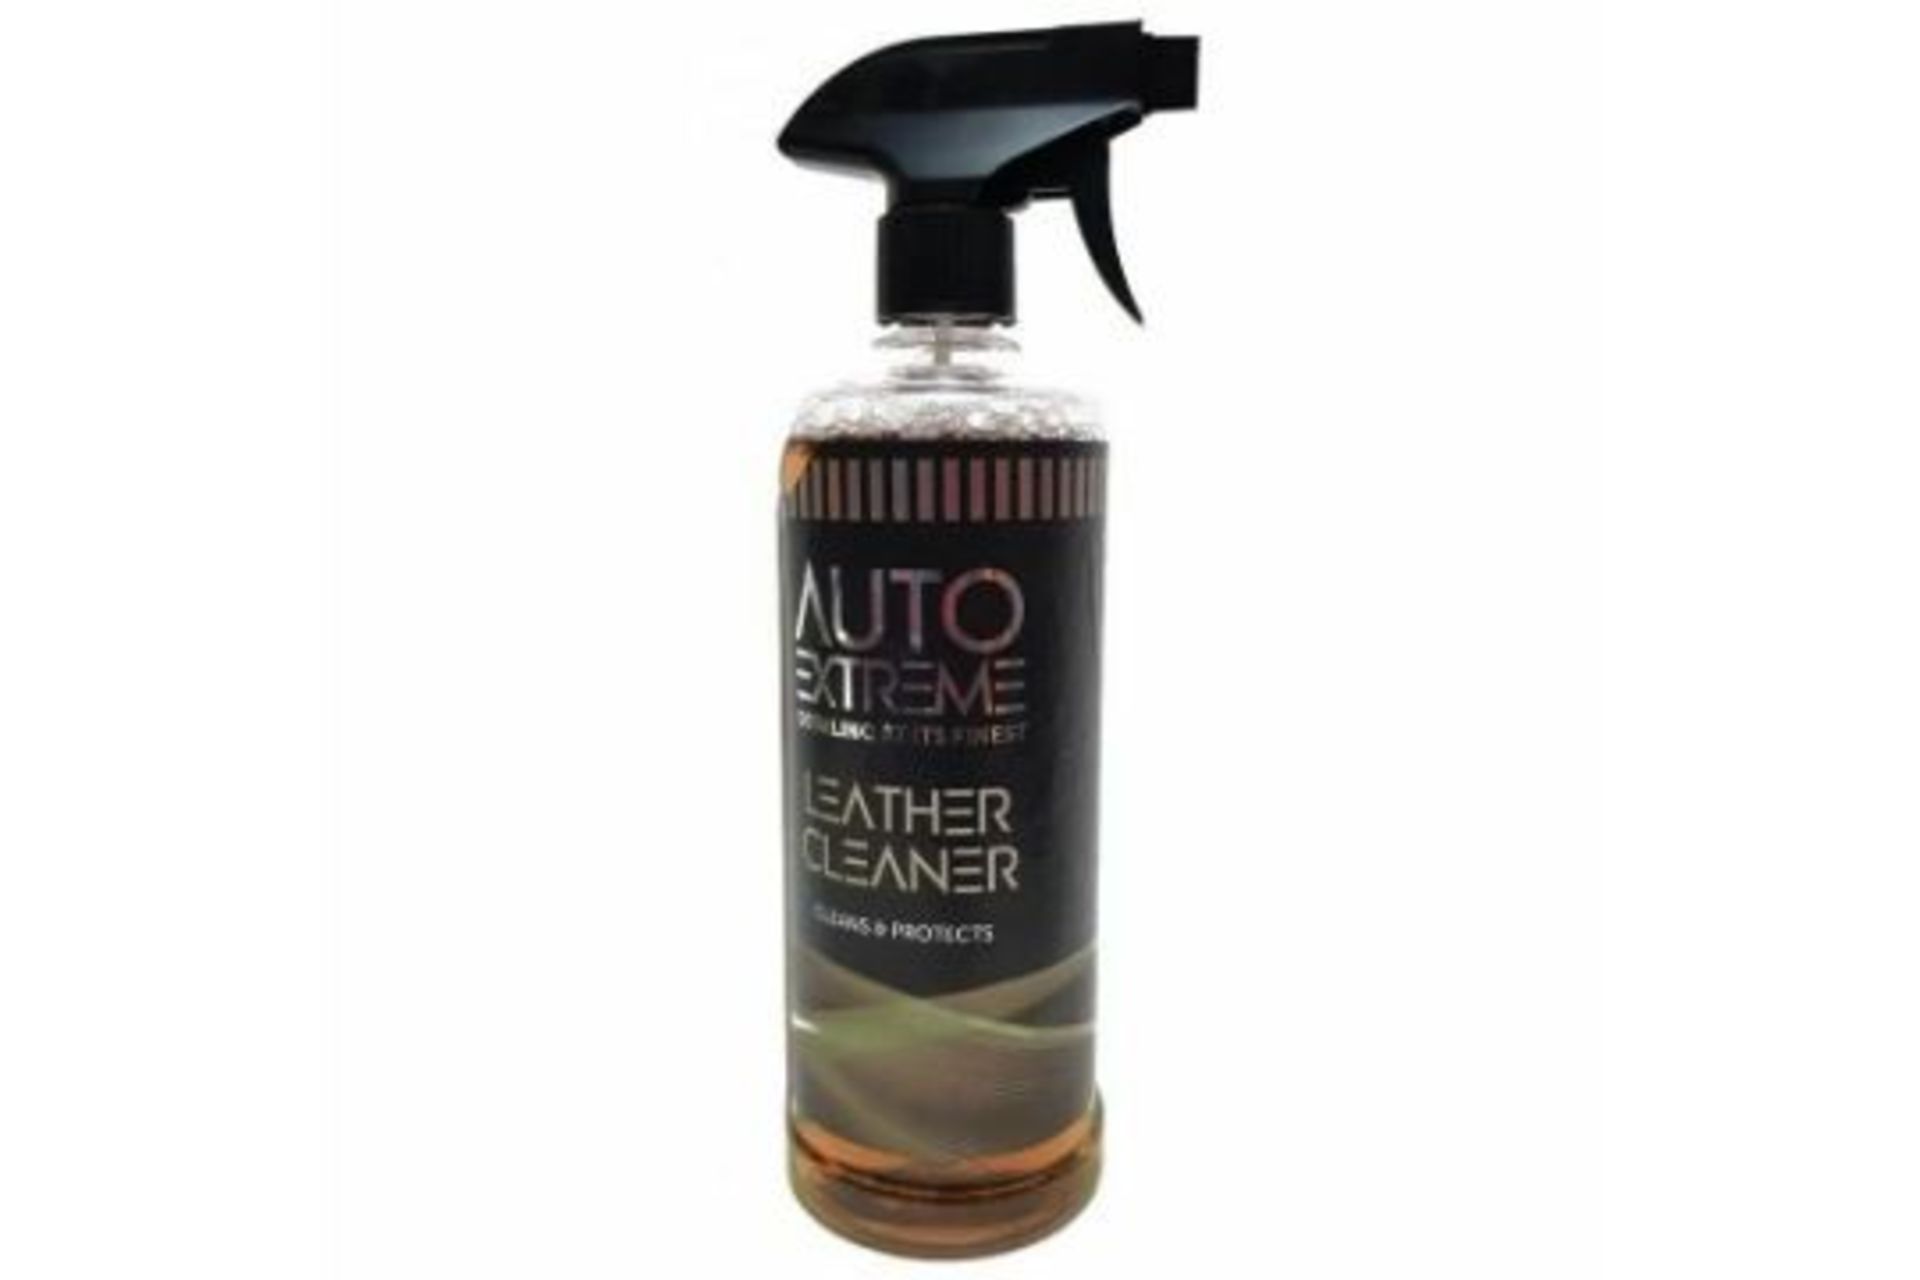 X2 BRAND NEW BOTTLES OF AUTO EXTREME LEATHER CLEANER 720ML